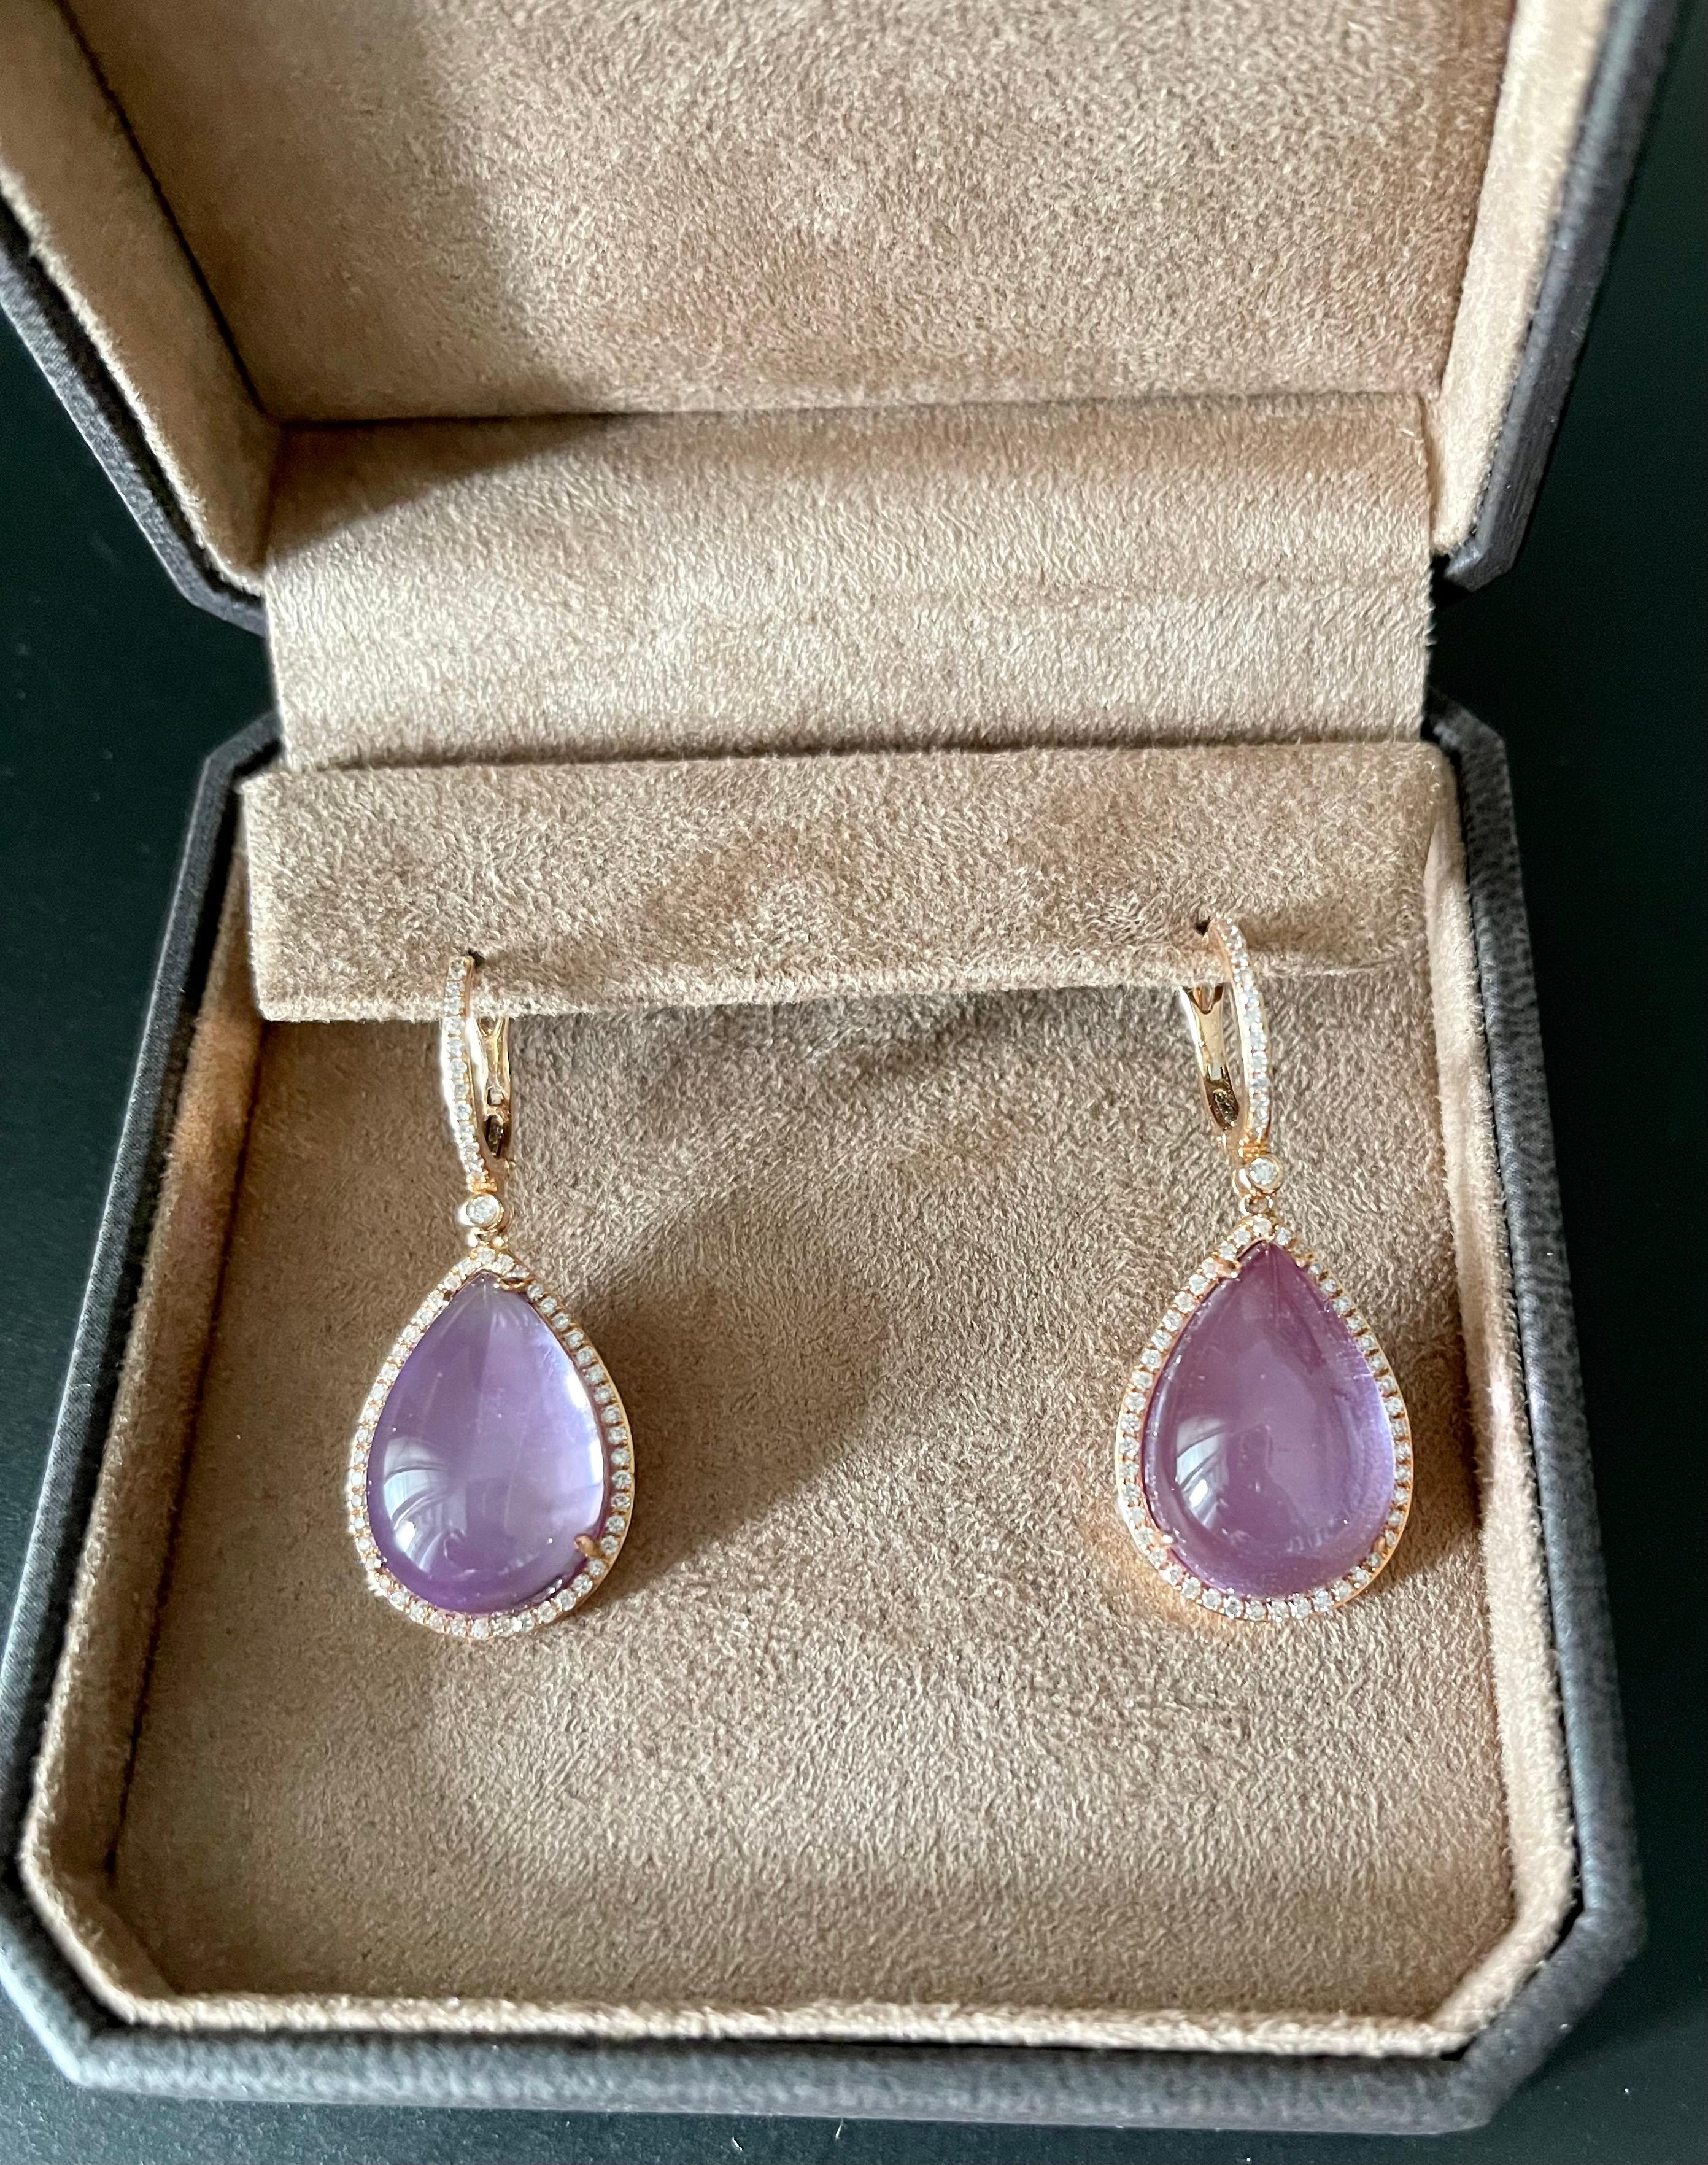 A pair of very elegant yet feminine earrings in 18 K rose Gold featuring a pear shape Amethyst top over a layer of mother of pearl surounded by 118 round brilliant cut Diamonds weighing 0.71 ct. This doublet consisting of mother of pearl and Quartz